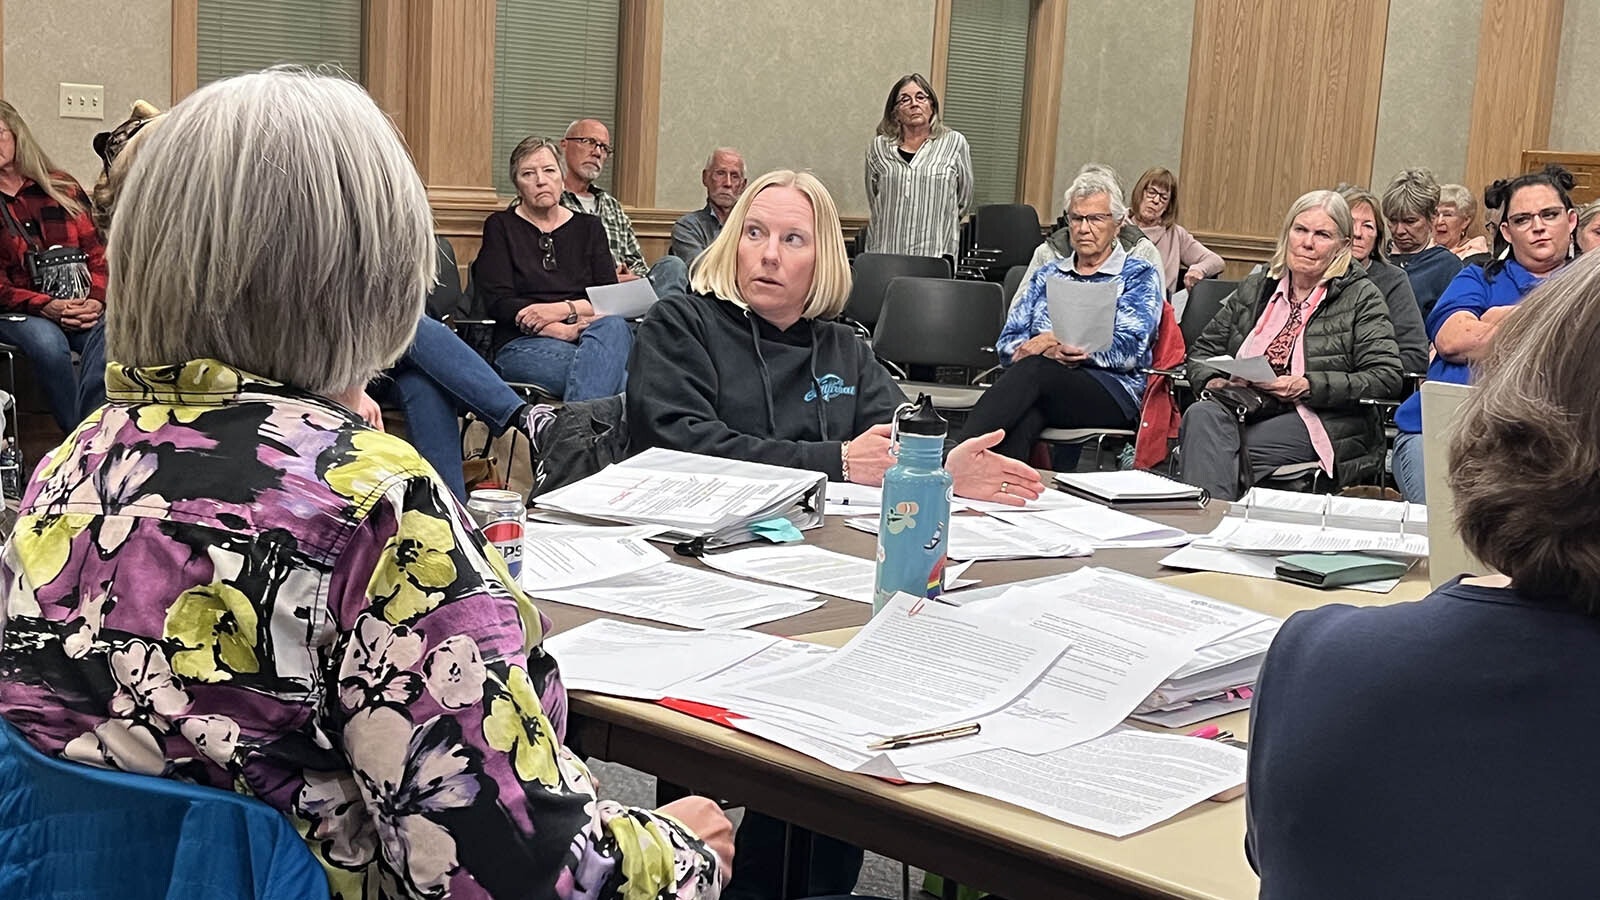 Fremont County Library Board Chair Carrie Johnson, back-facing, and board member Kristen McClelland, center, sparred over whether the library should implement parental checkout restrictions.